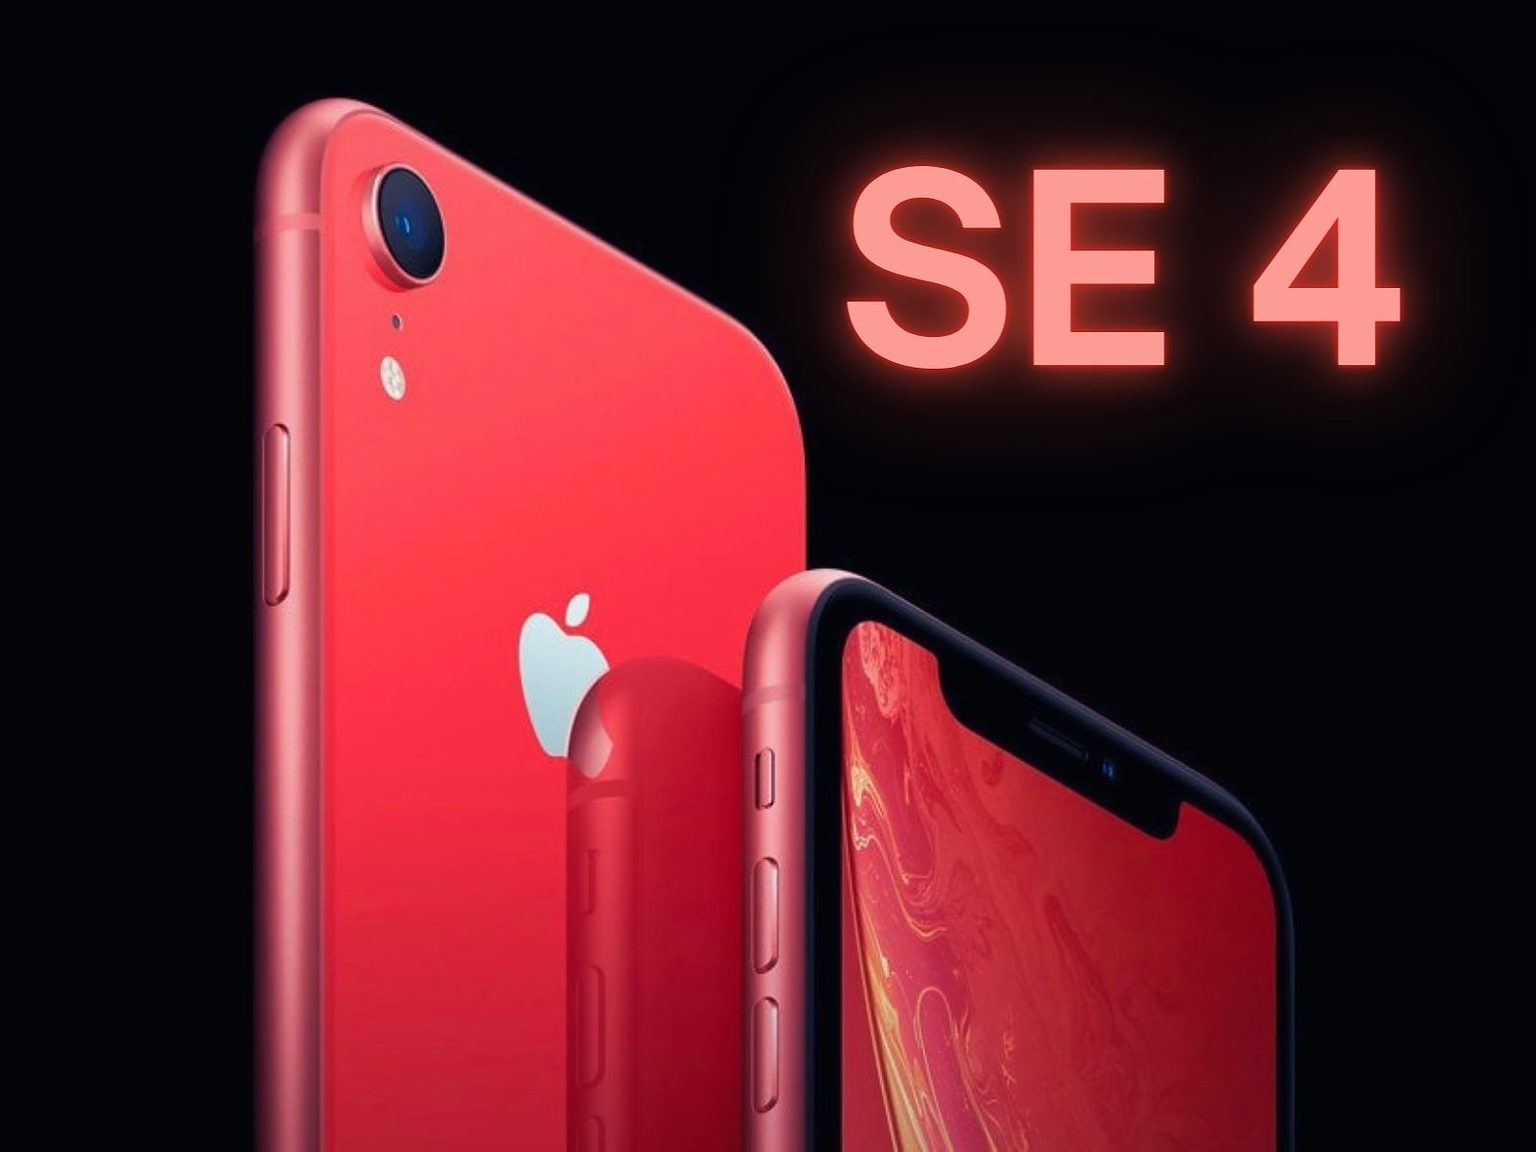 iPhone XR with iPhone SE 4 text